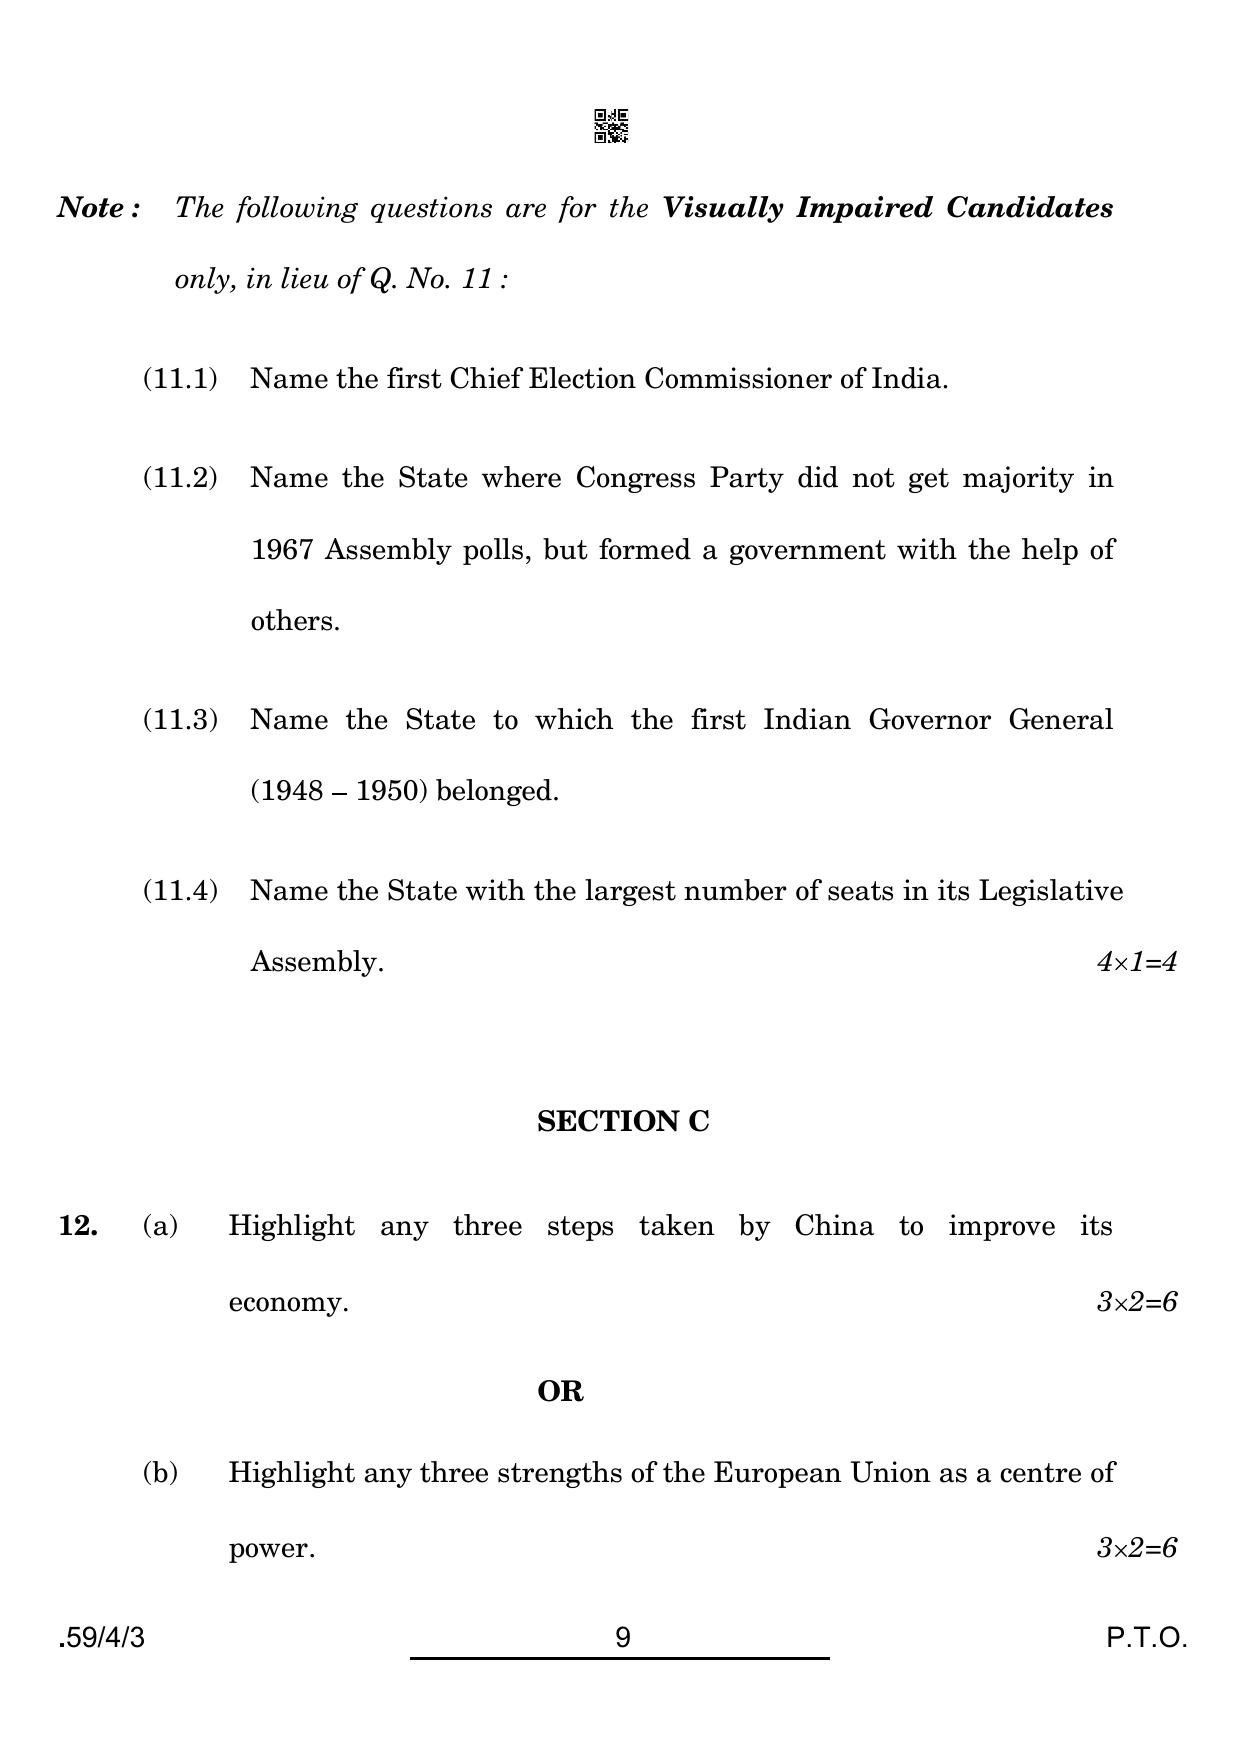 CBSE Class 12 59-4-3 Political Science 2022 Question Paper - Page 9